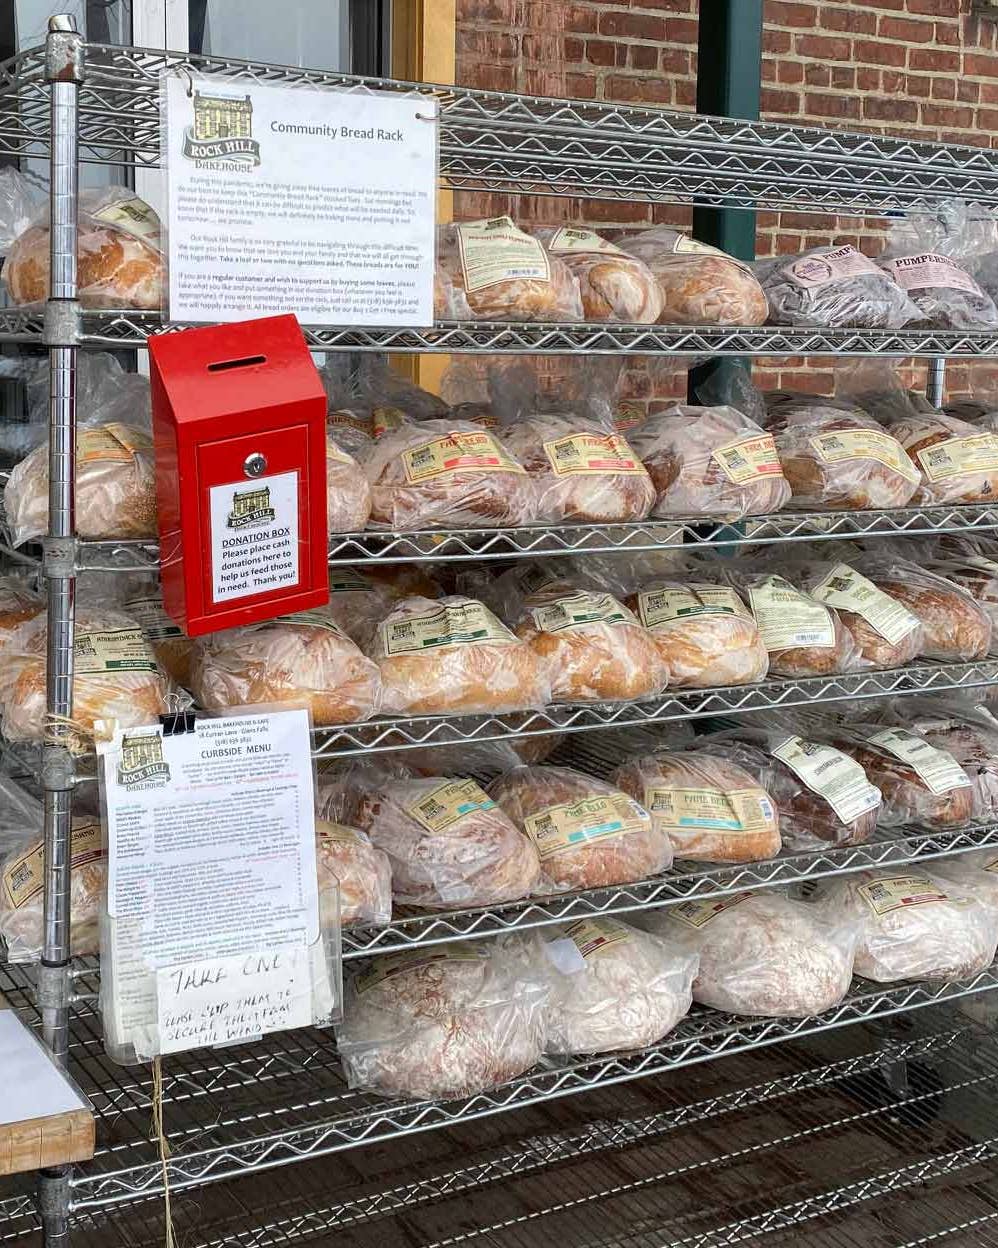 New York’s Rock Hill Bakehouse & Cafe gives away 750 loaves of fresh bread every week using a no-questions-asked Community Bread Rack.